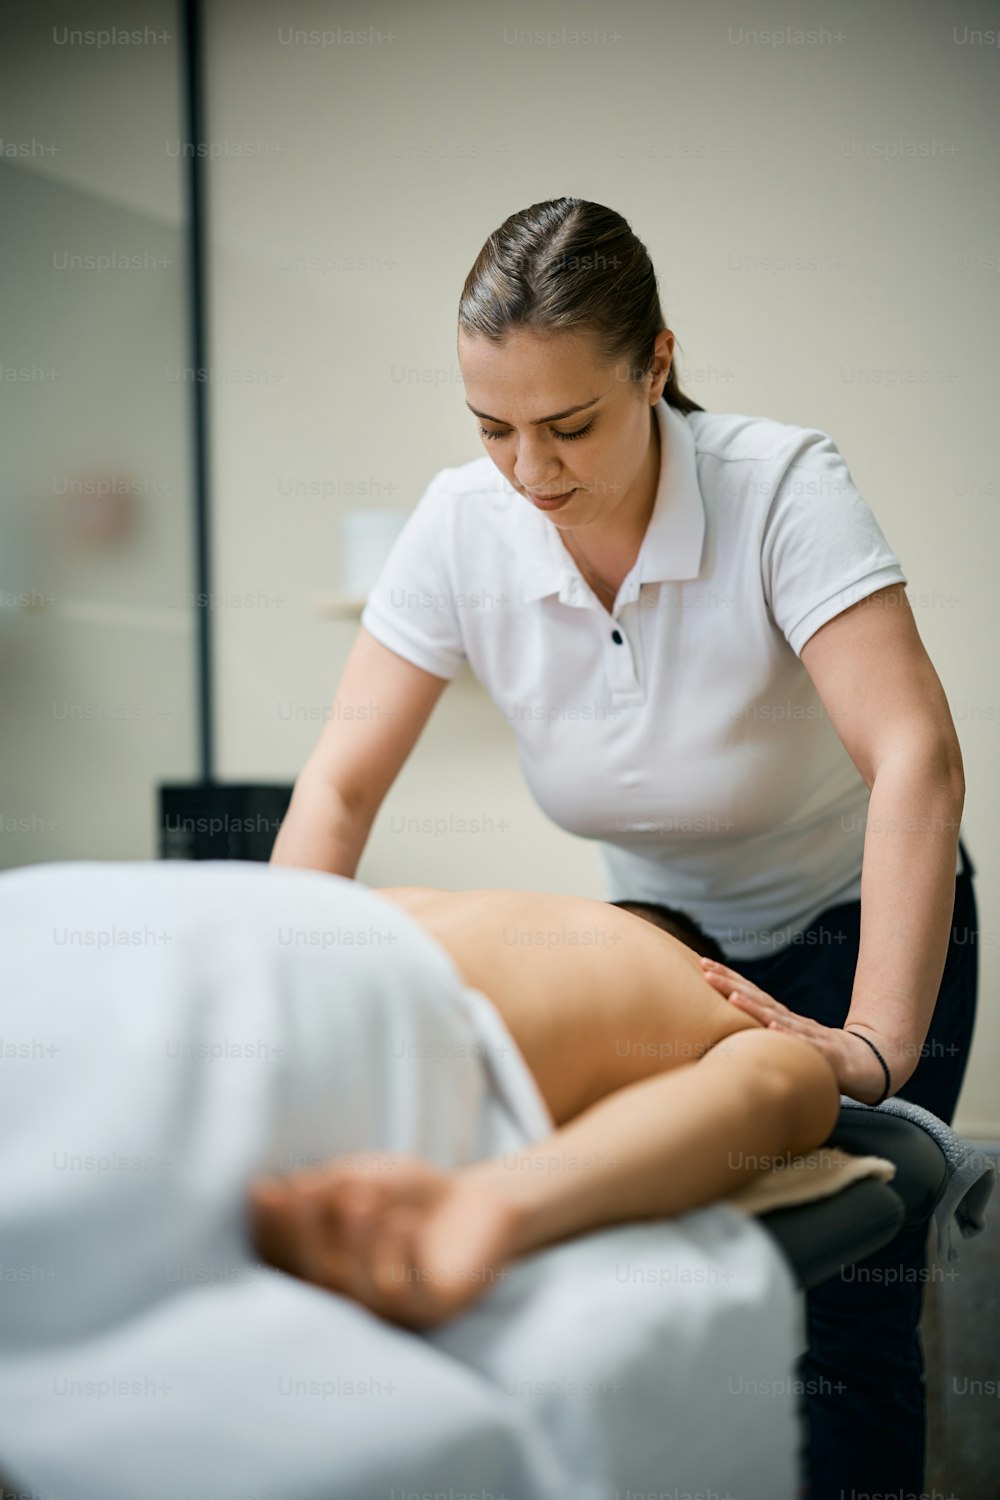 Female physiotherapist massaging back of a man during treatment at physical therapy center.